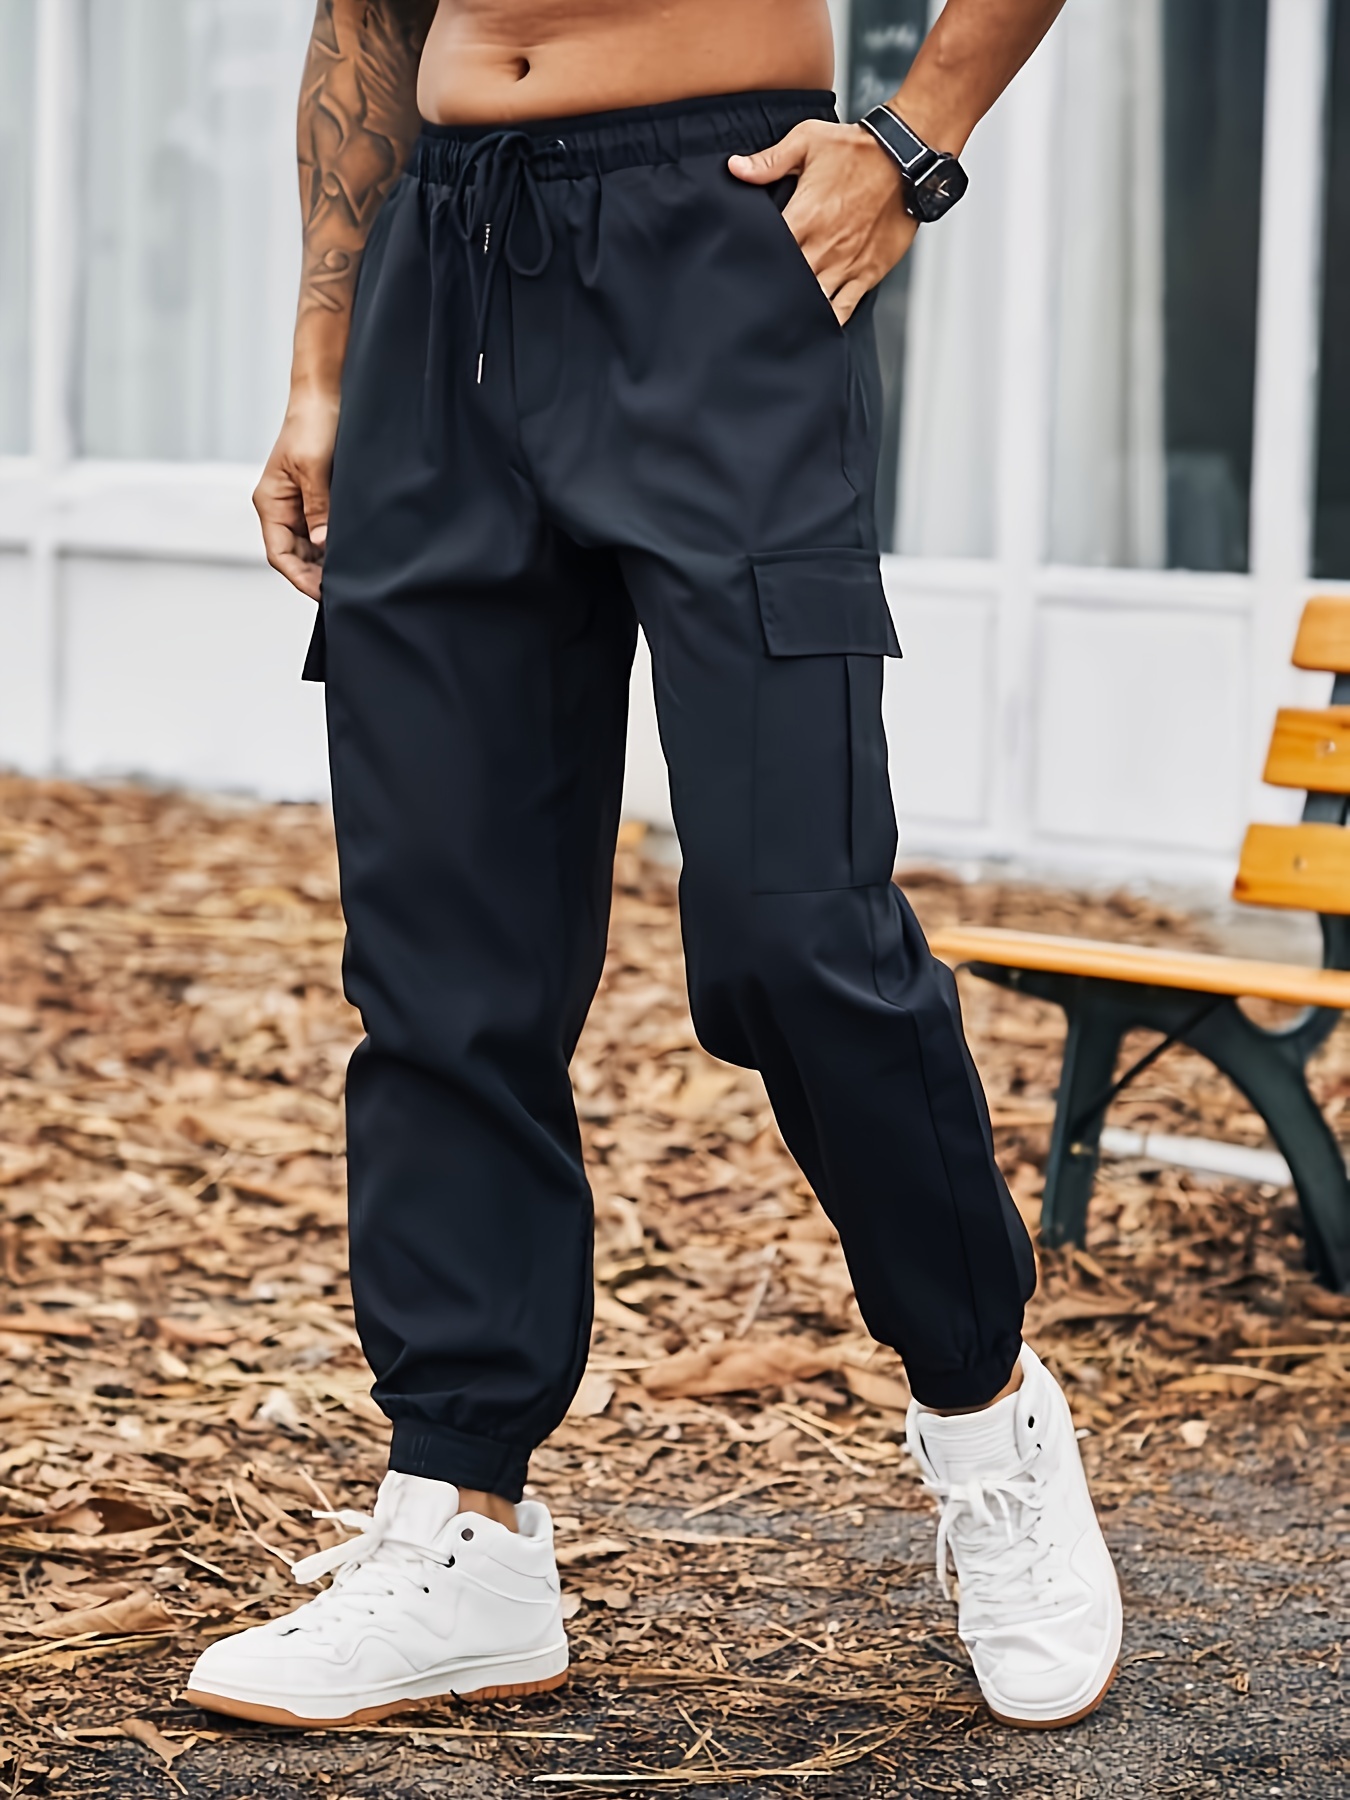 Plus Size Men's Solid Cargo Pants Street Style Joggers With Pockets, Men's  Clothing